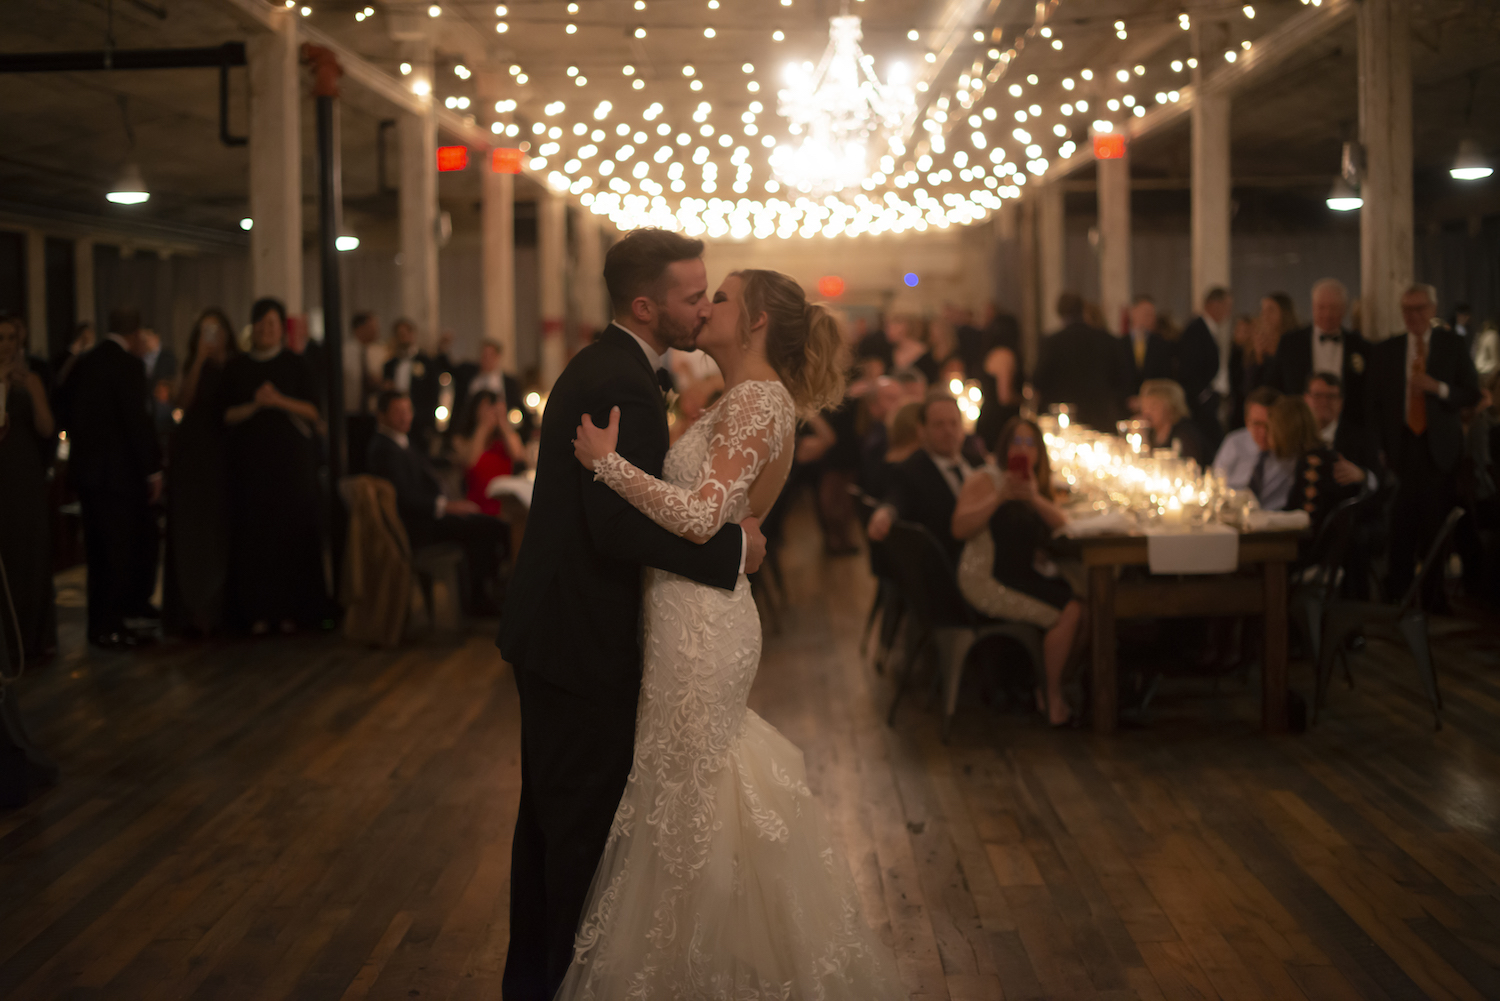 Bride and groom kissing during first dance at rustic Michigan wedding